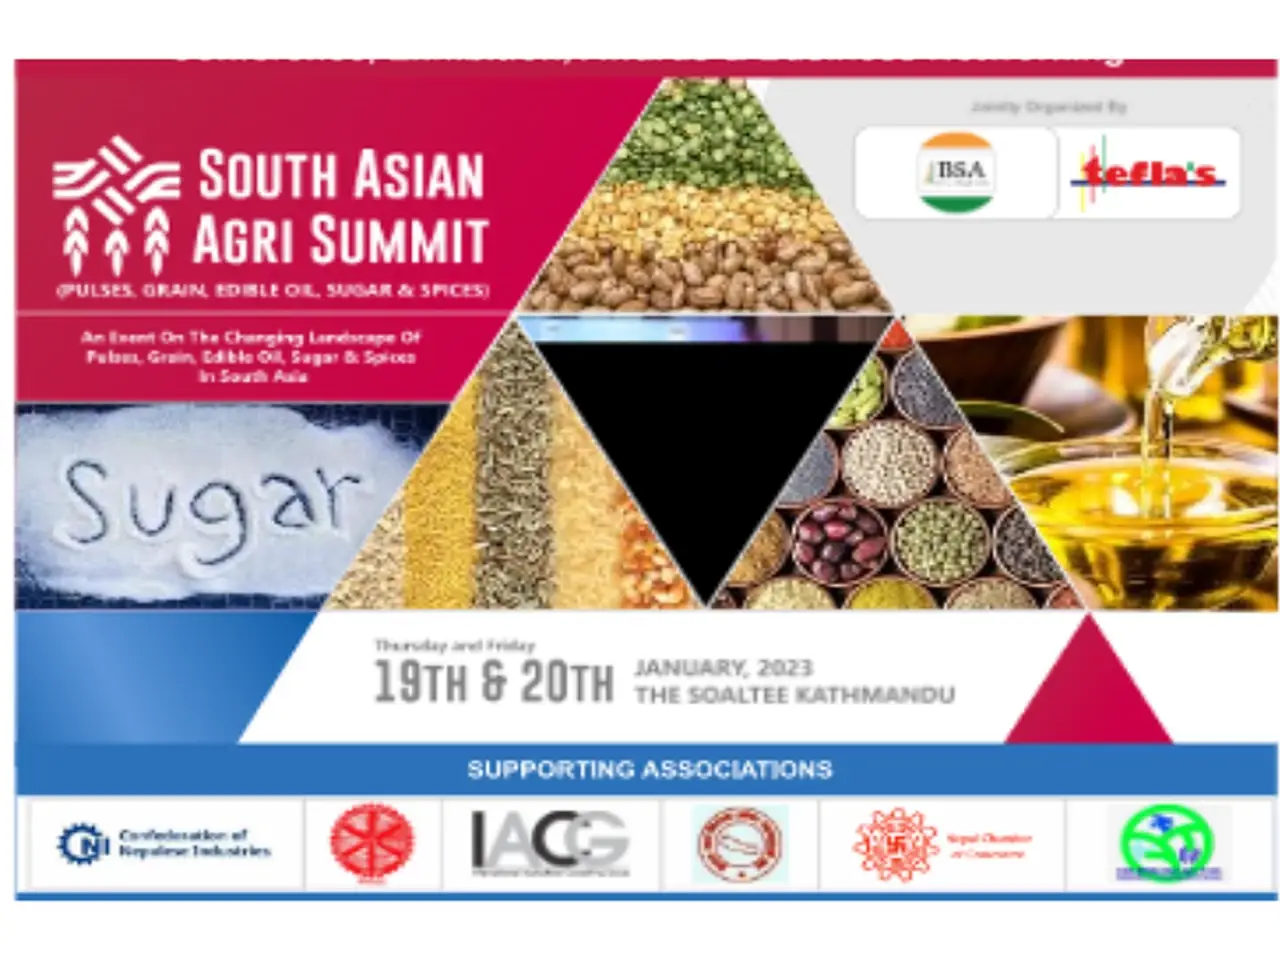 Nepal to Host the first ever South Asian Agri Summit 2023 at Soaltee Hotel in Kathmandu from 19th to 20th January 2023.